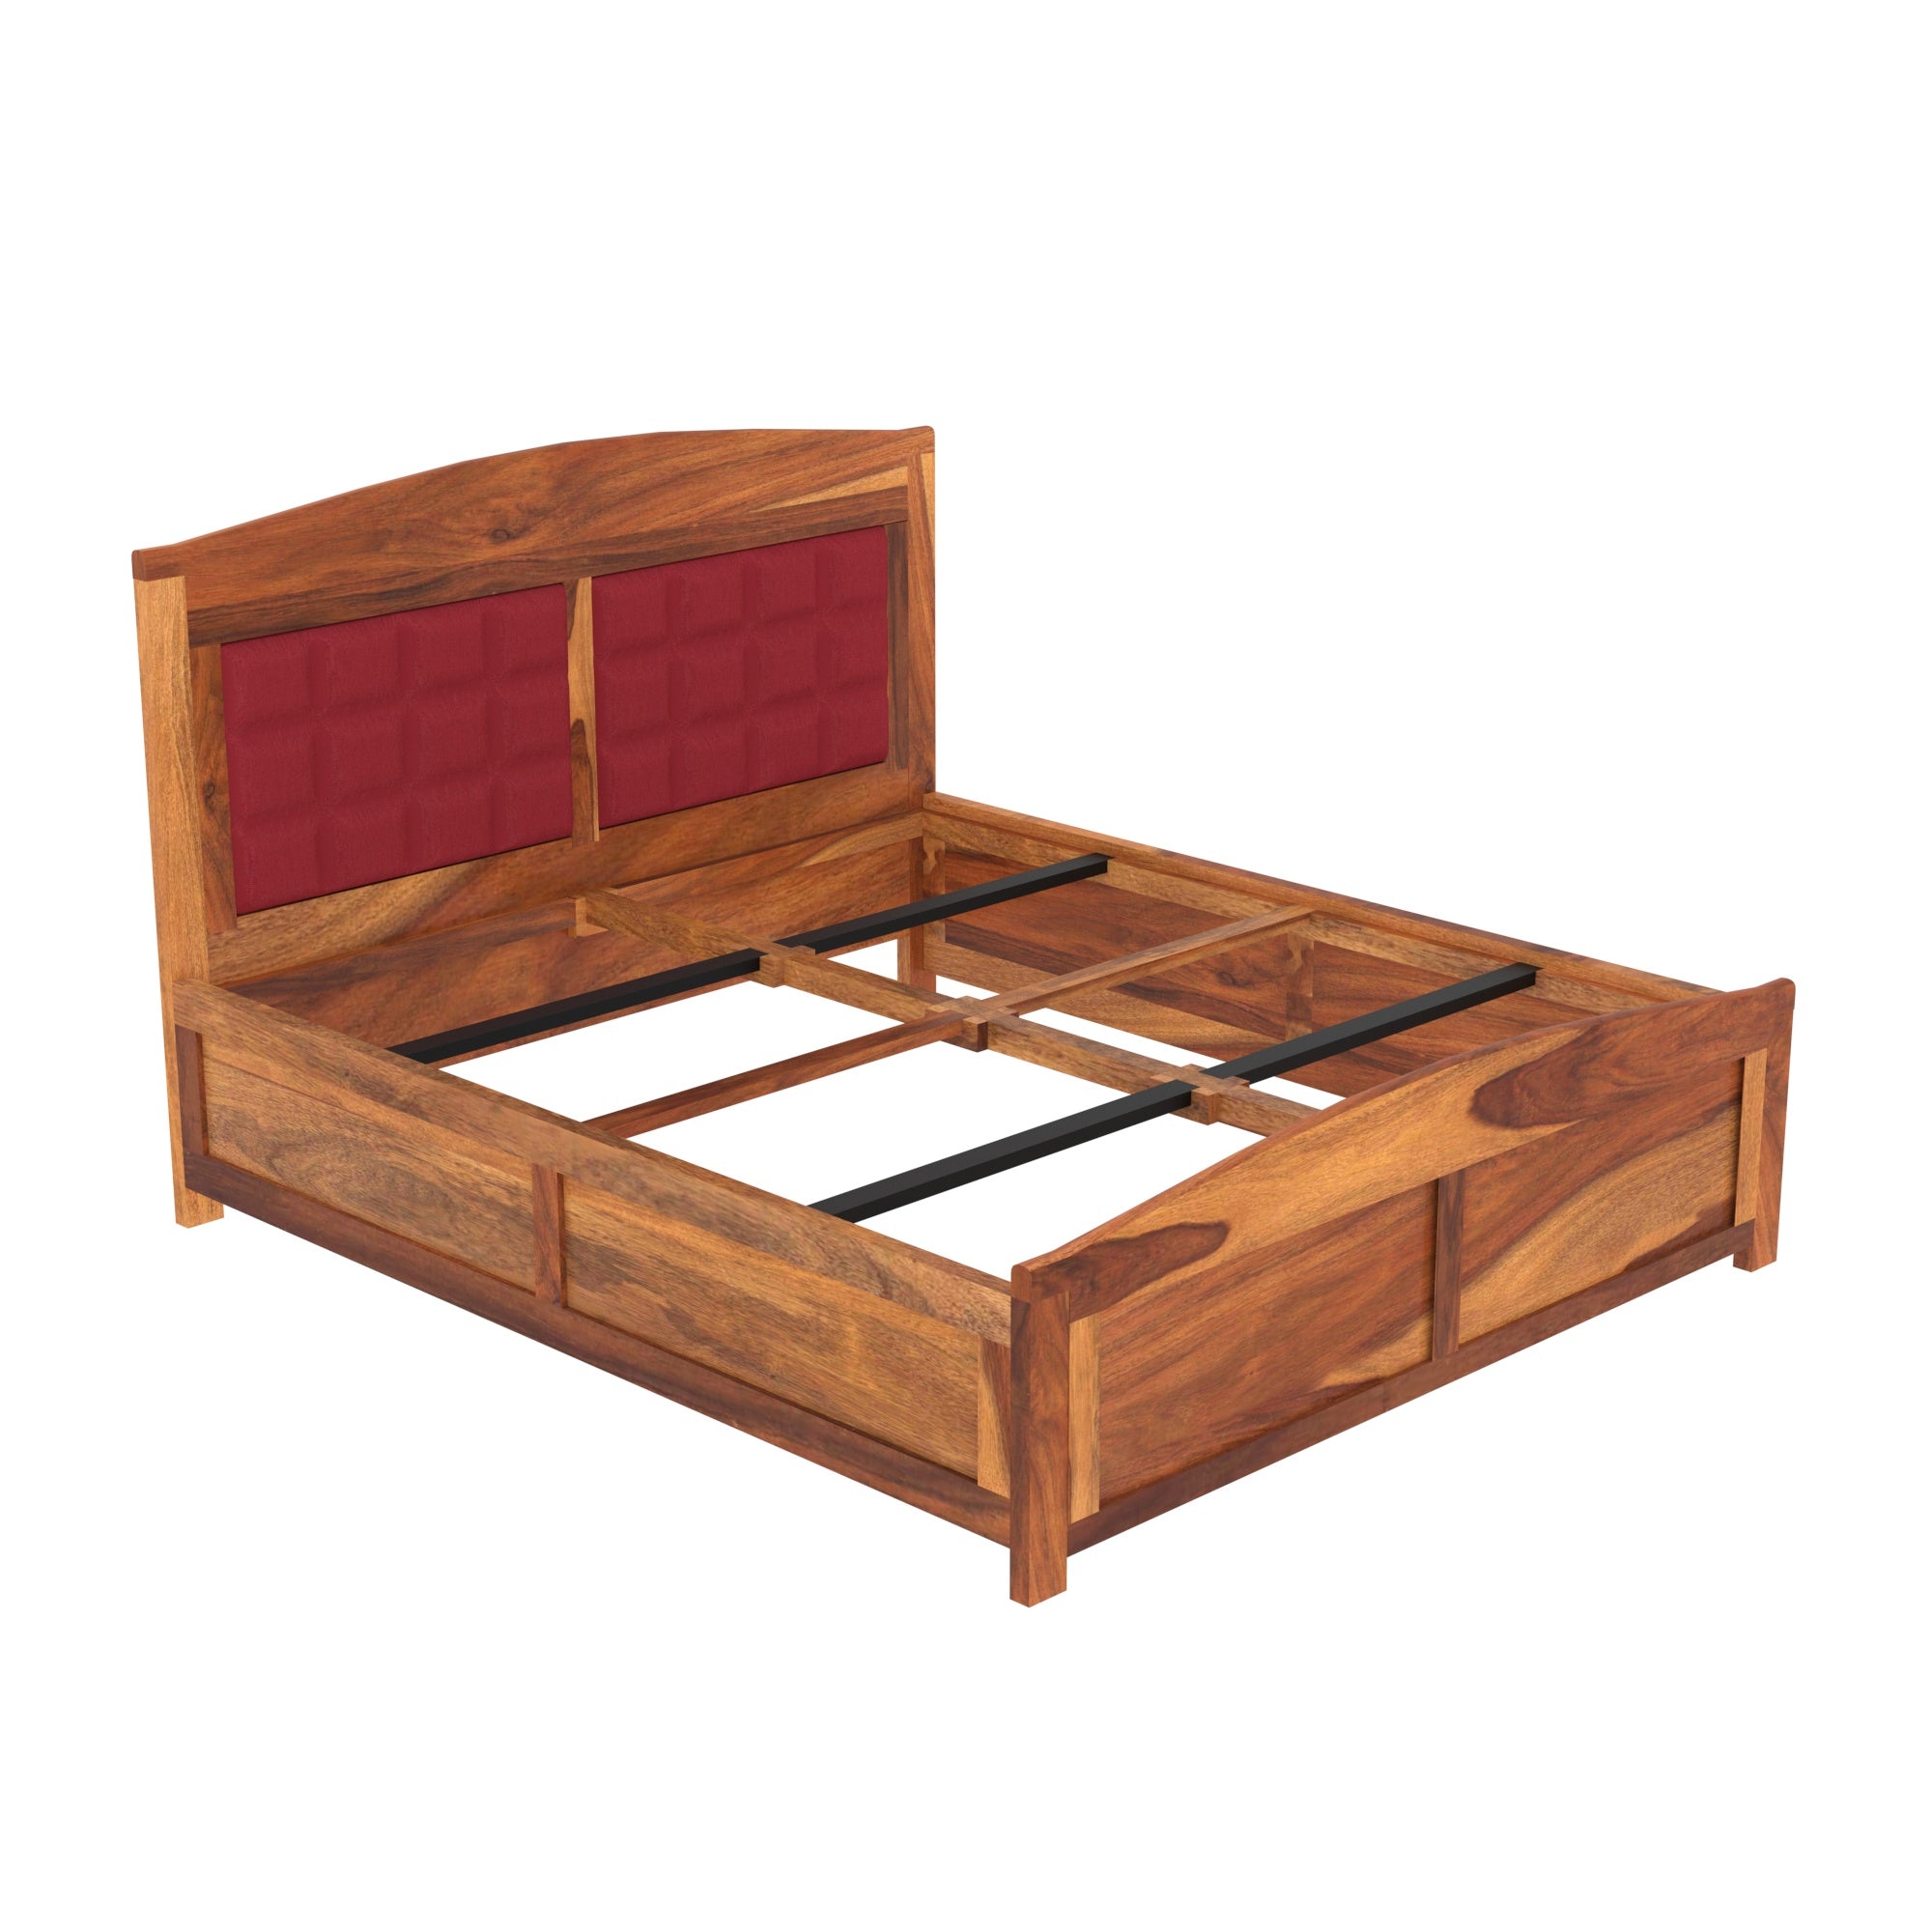 Wooden Classical Upholstered Bed Sheesham Wood Bed